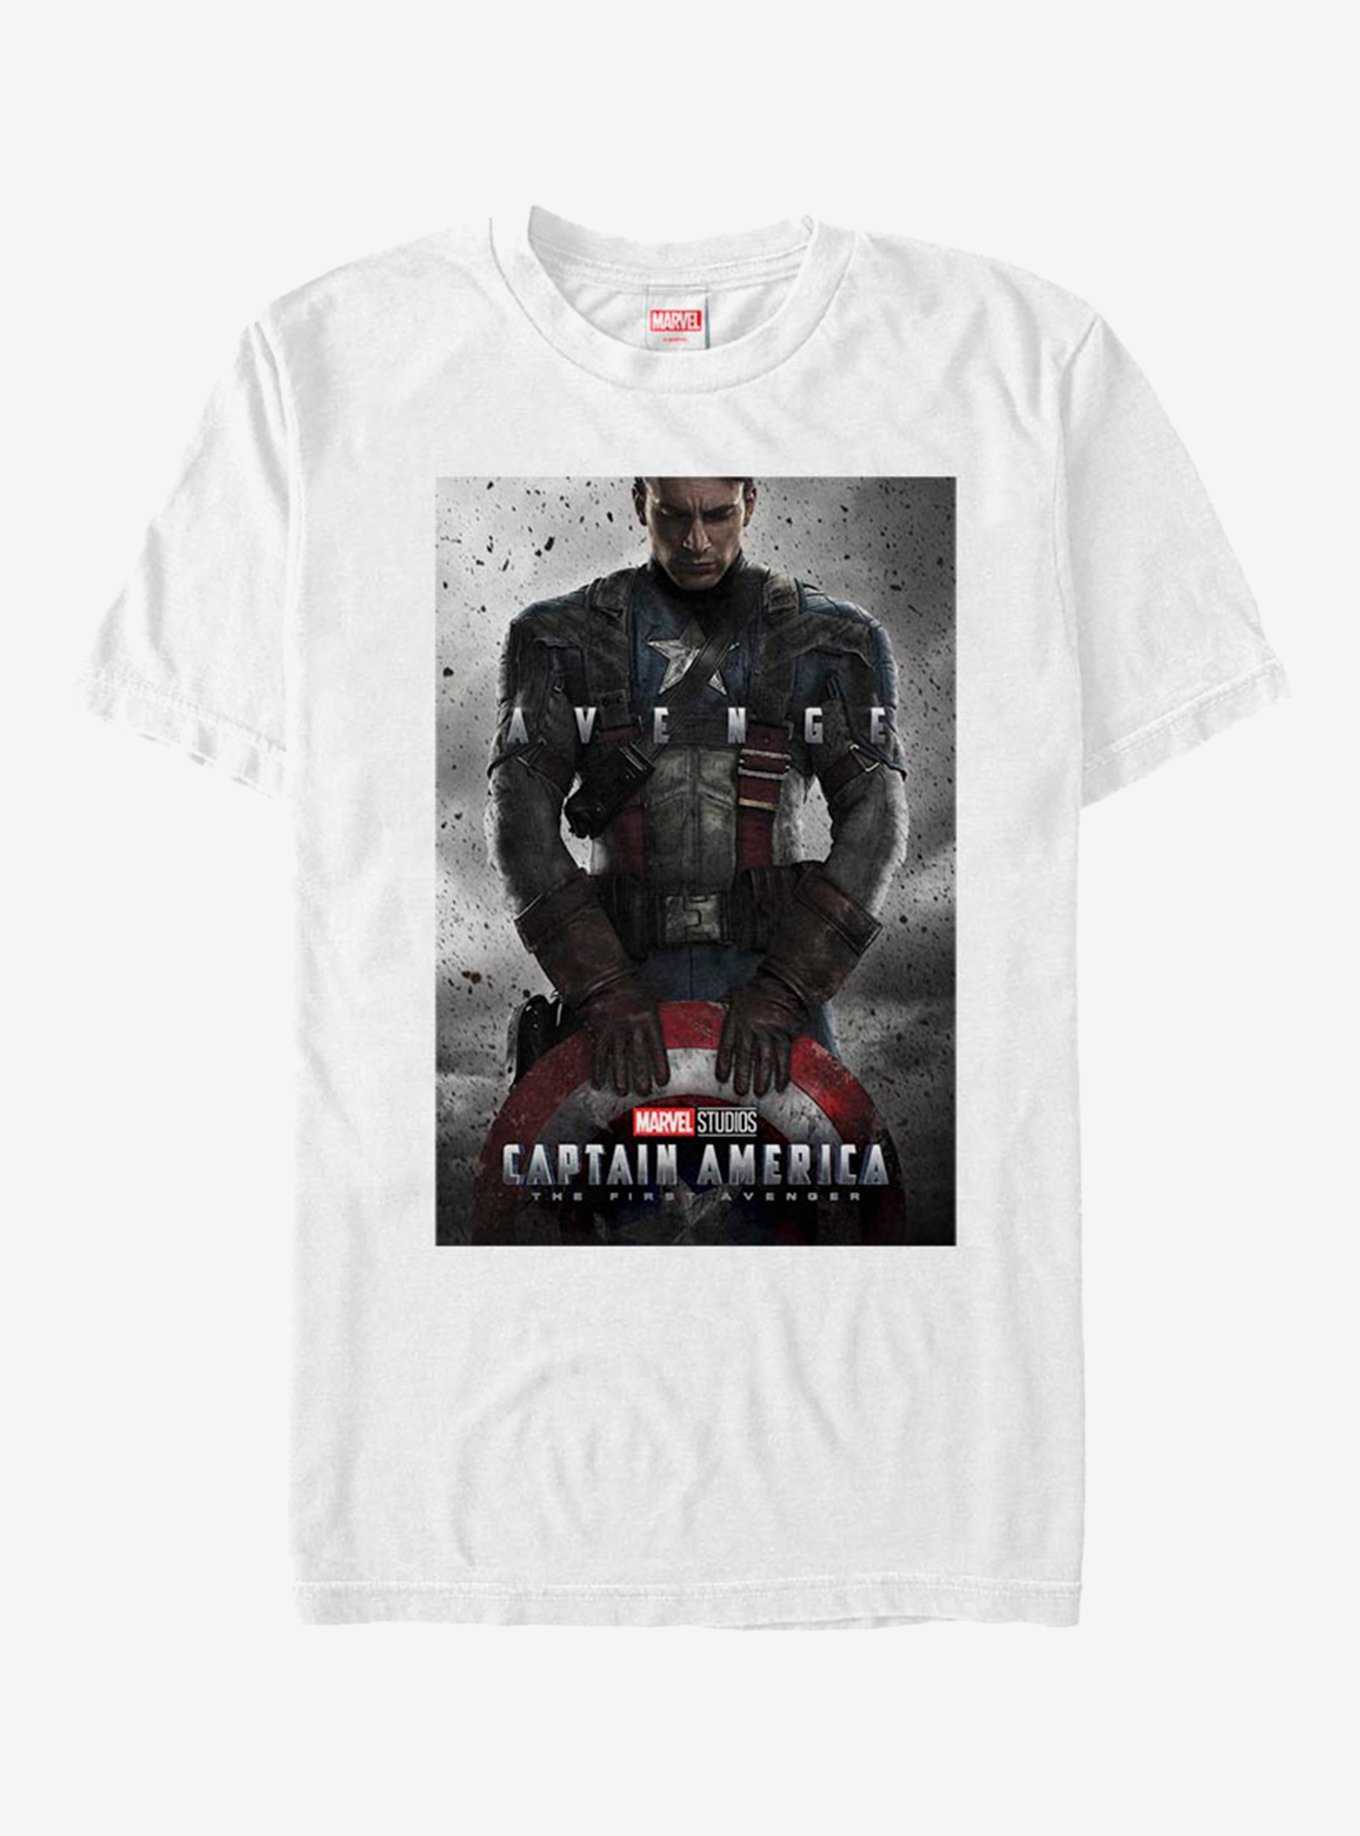 OFFICIAL Merchandise & Captain | America Hot Shirts, Topic Clothing